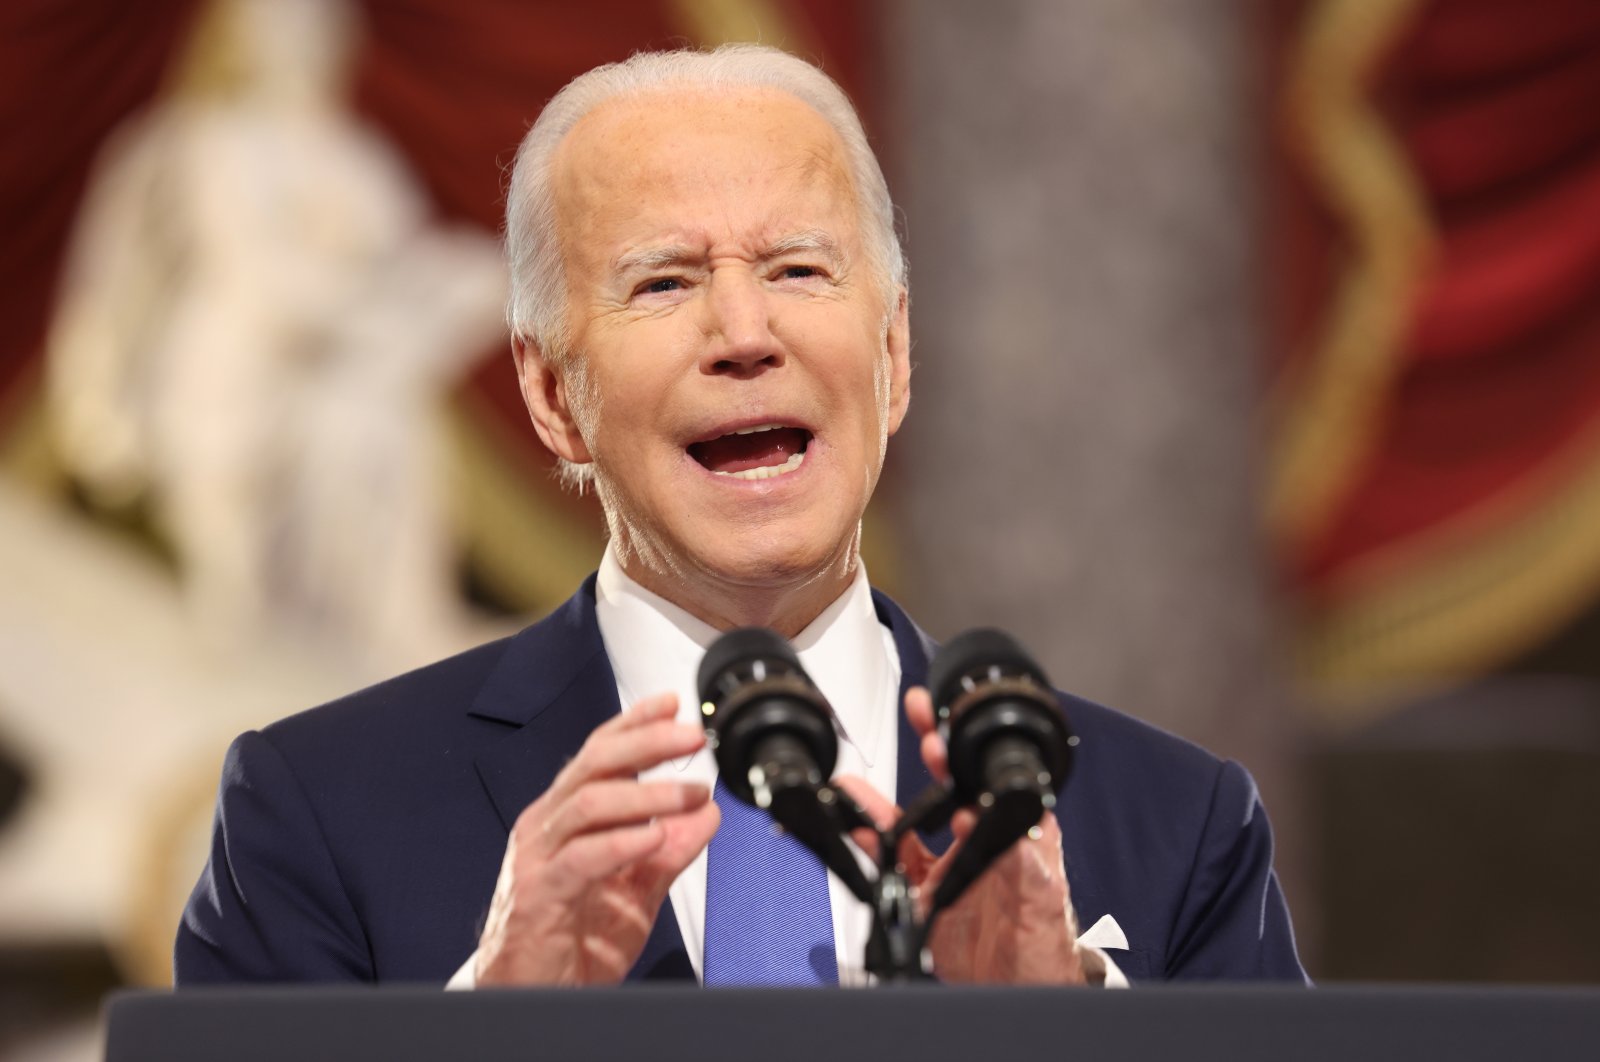 U.S. President Joe Biden delivers remarks on the one-year anniversary of the Jan. 6, 2021, insurrection at the Statuary Hall of the Capitol in Washington, U.S., Jan. 6, 2022. (EPA Photo)